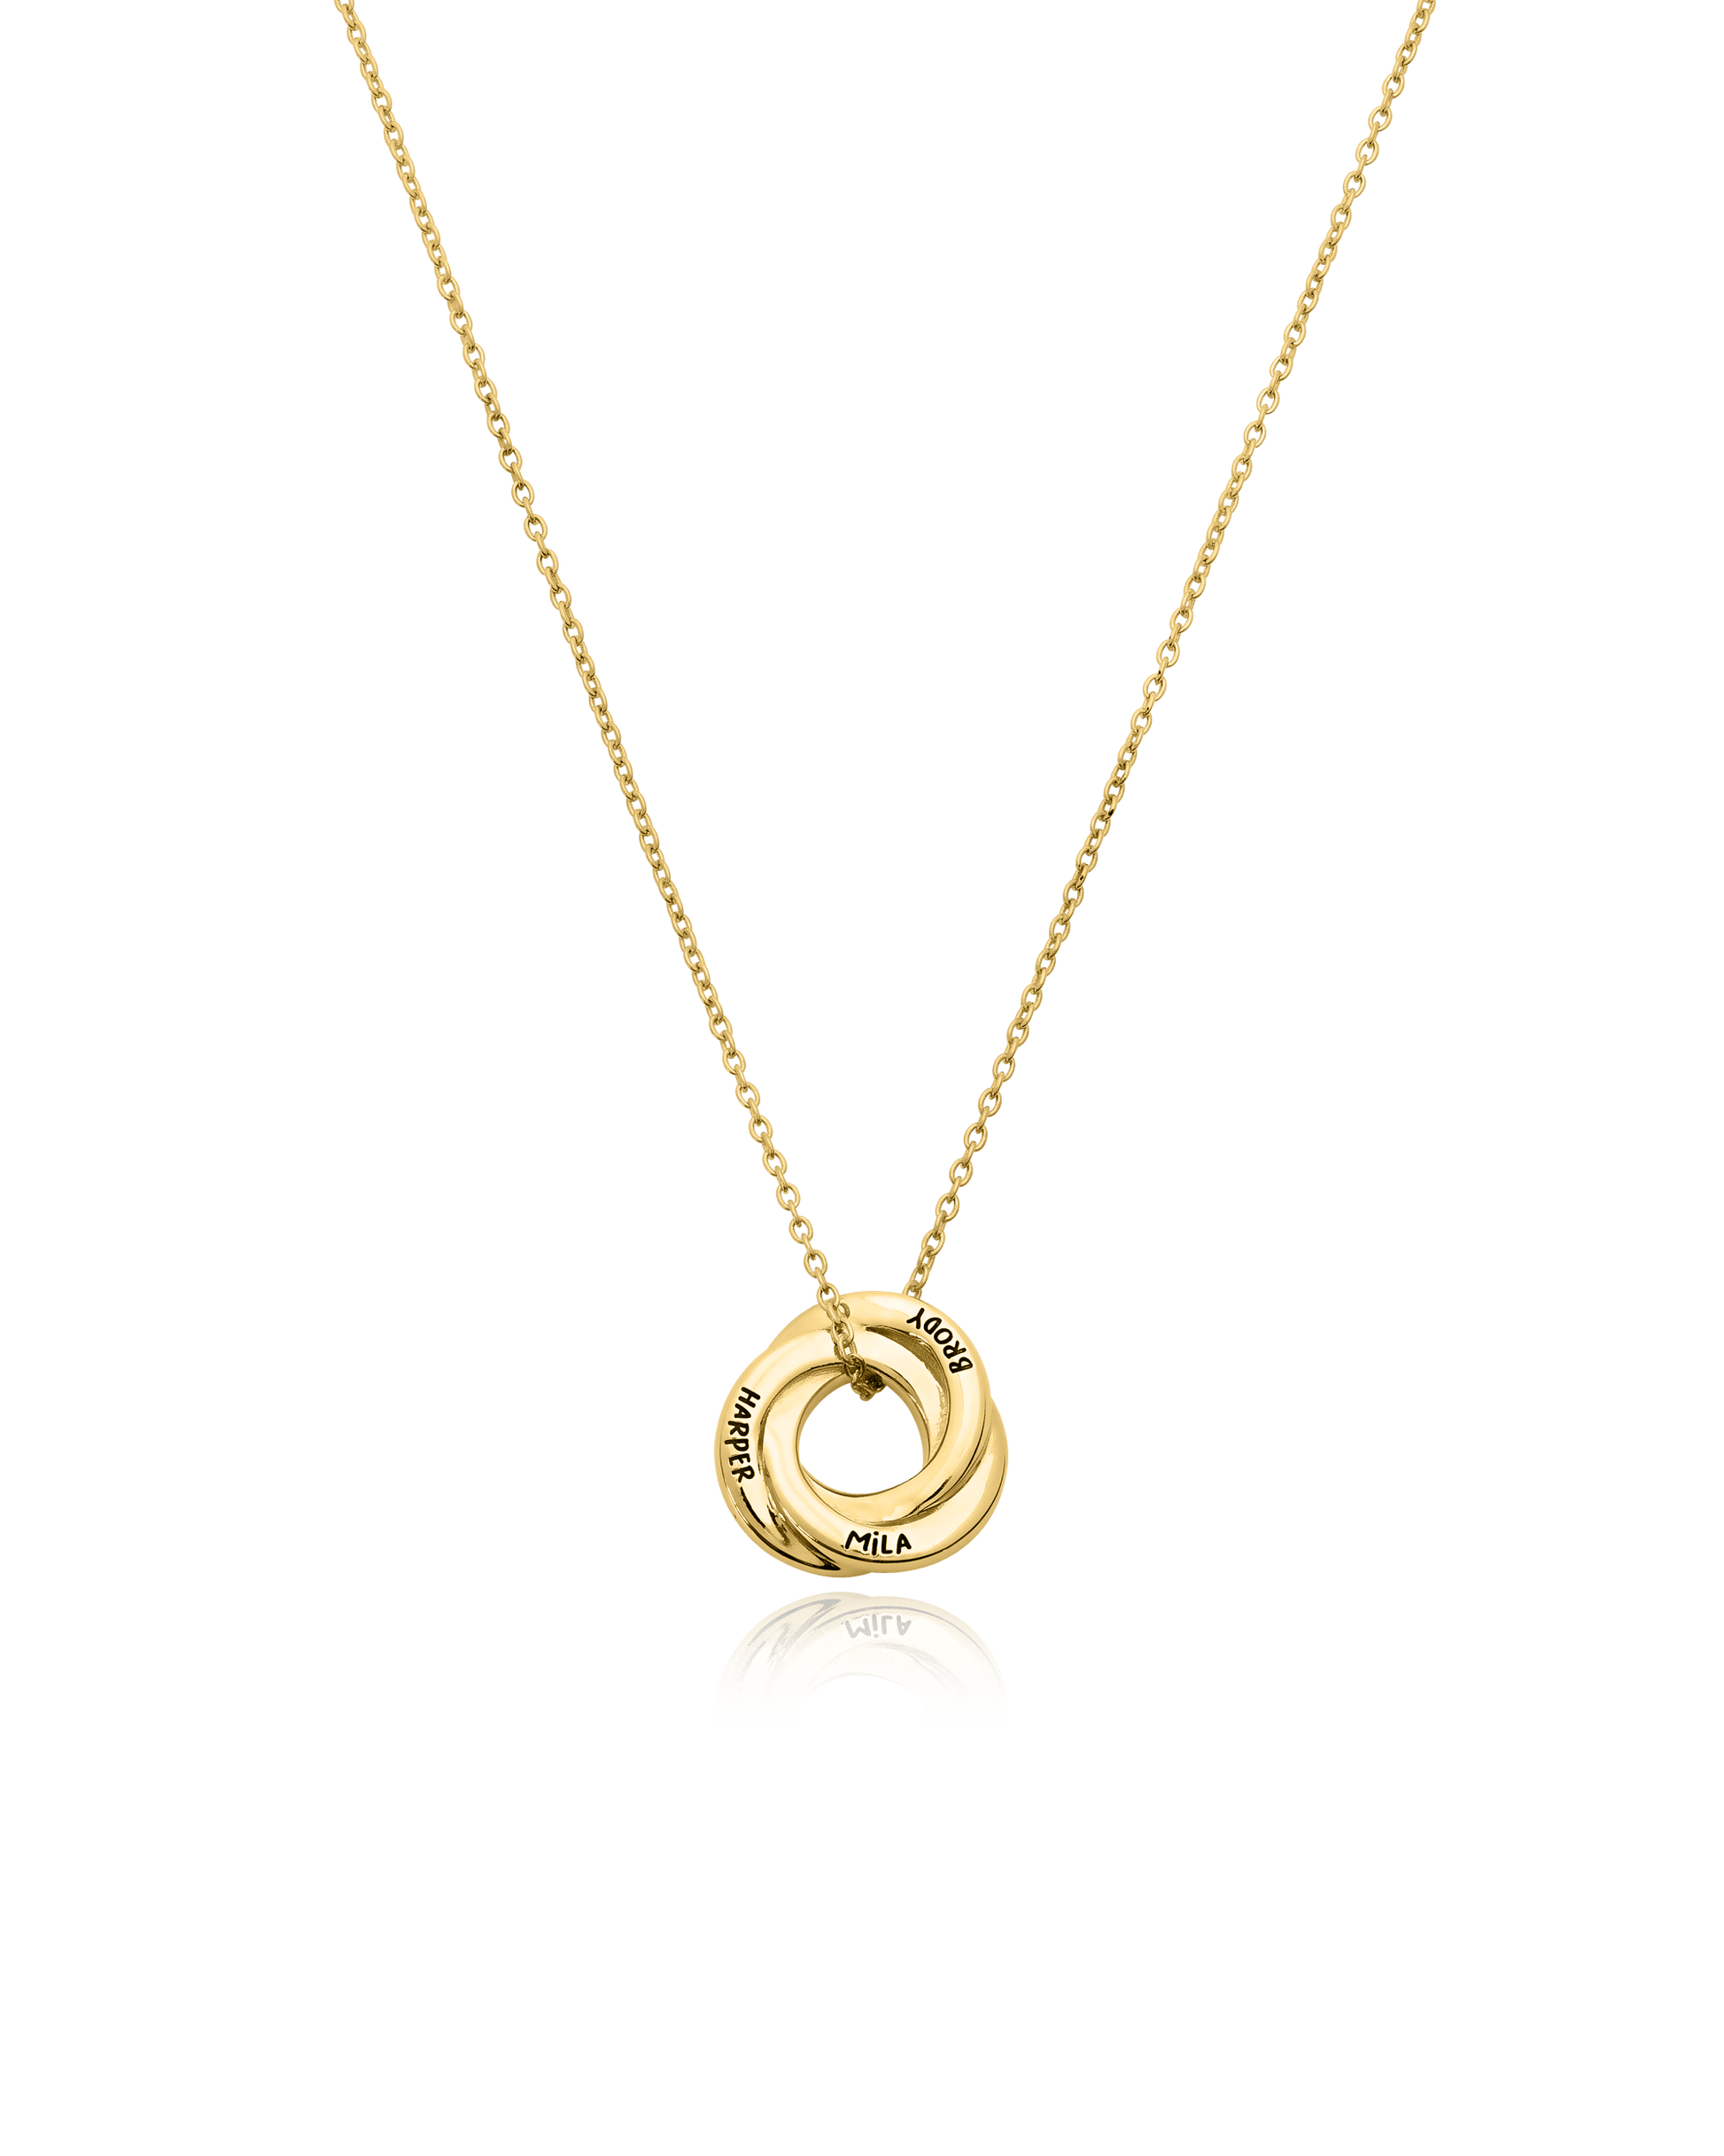 Russian Ring Necklace - 18K Rose Vermeil Necklaces magal-dev 